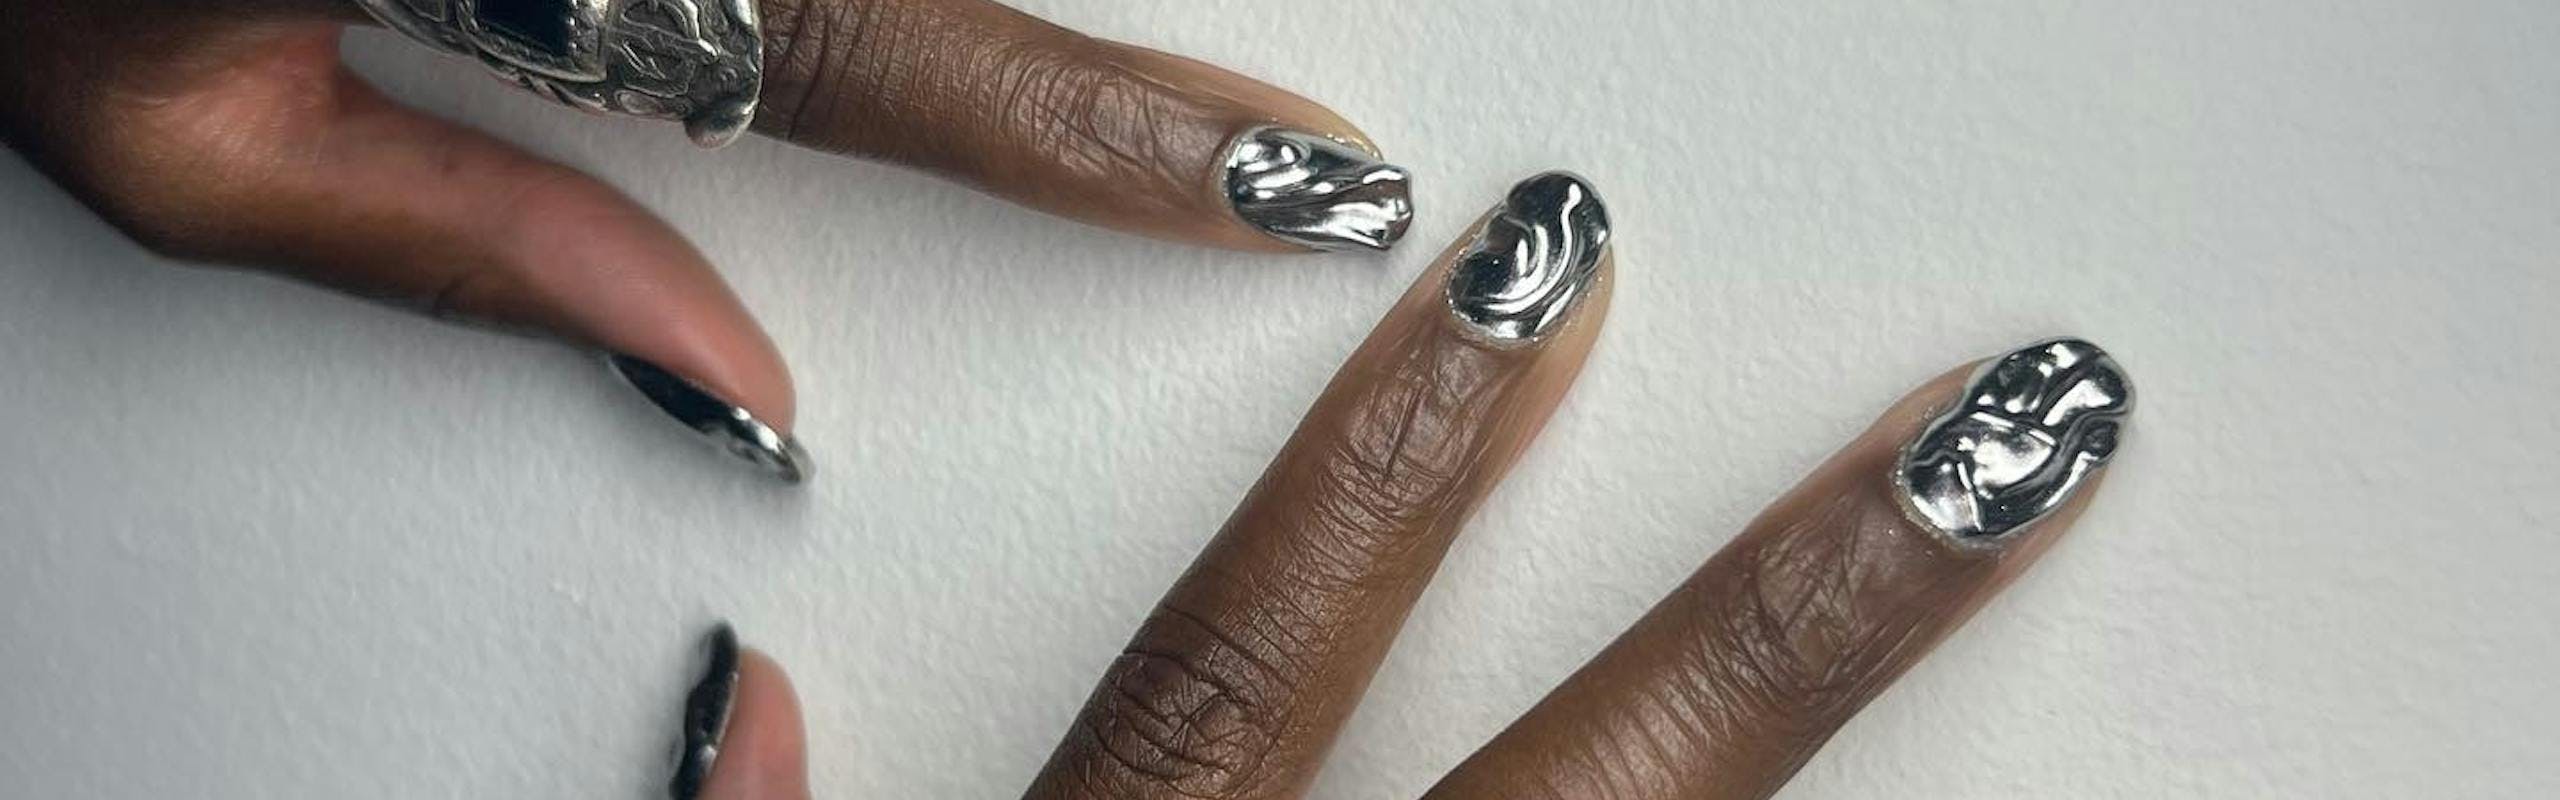 Chrome manicure with 3D ripple effect.